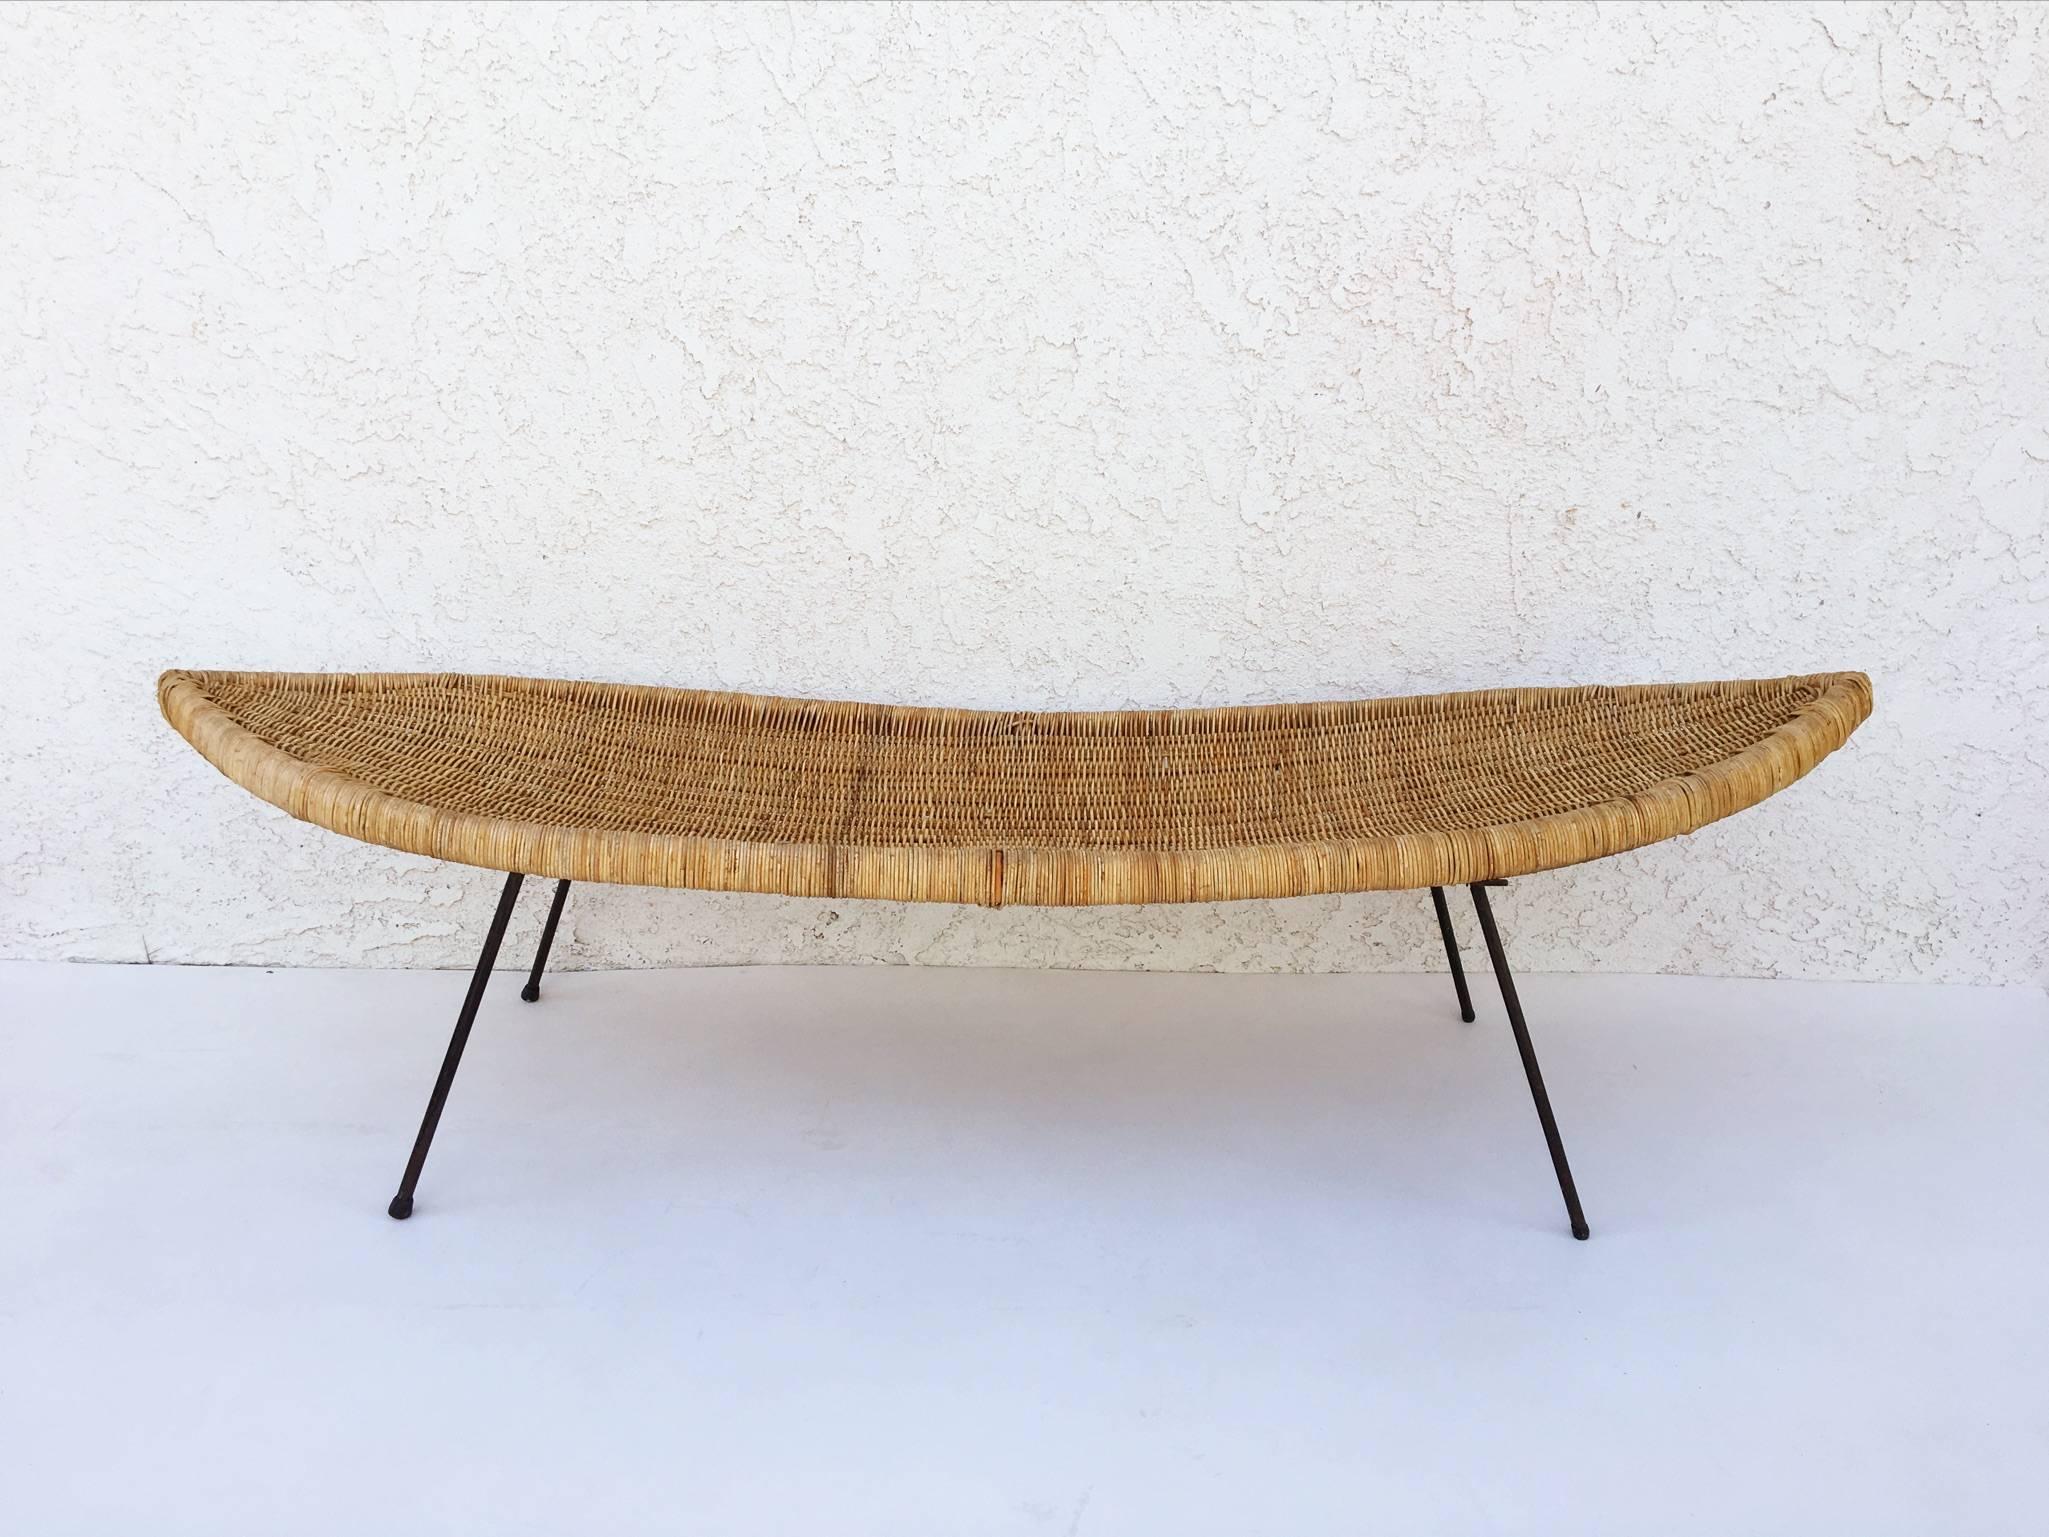 An amazing surfboard shape cocktail table constructed by wicker and steel legs,
circa 1960s. 
This is in original condition. 
Dimensions: 18